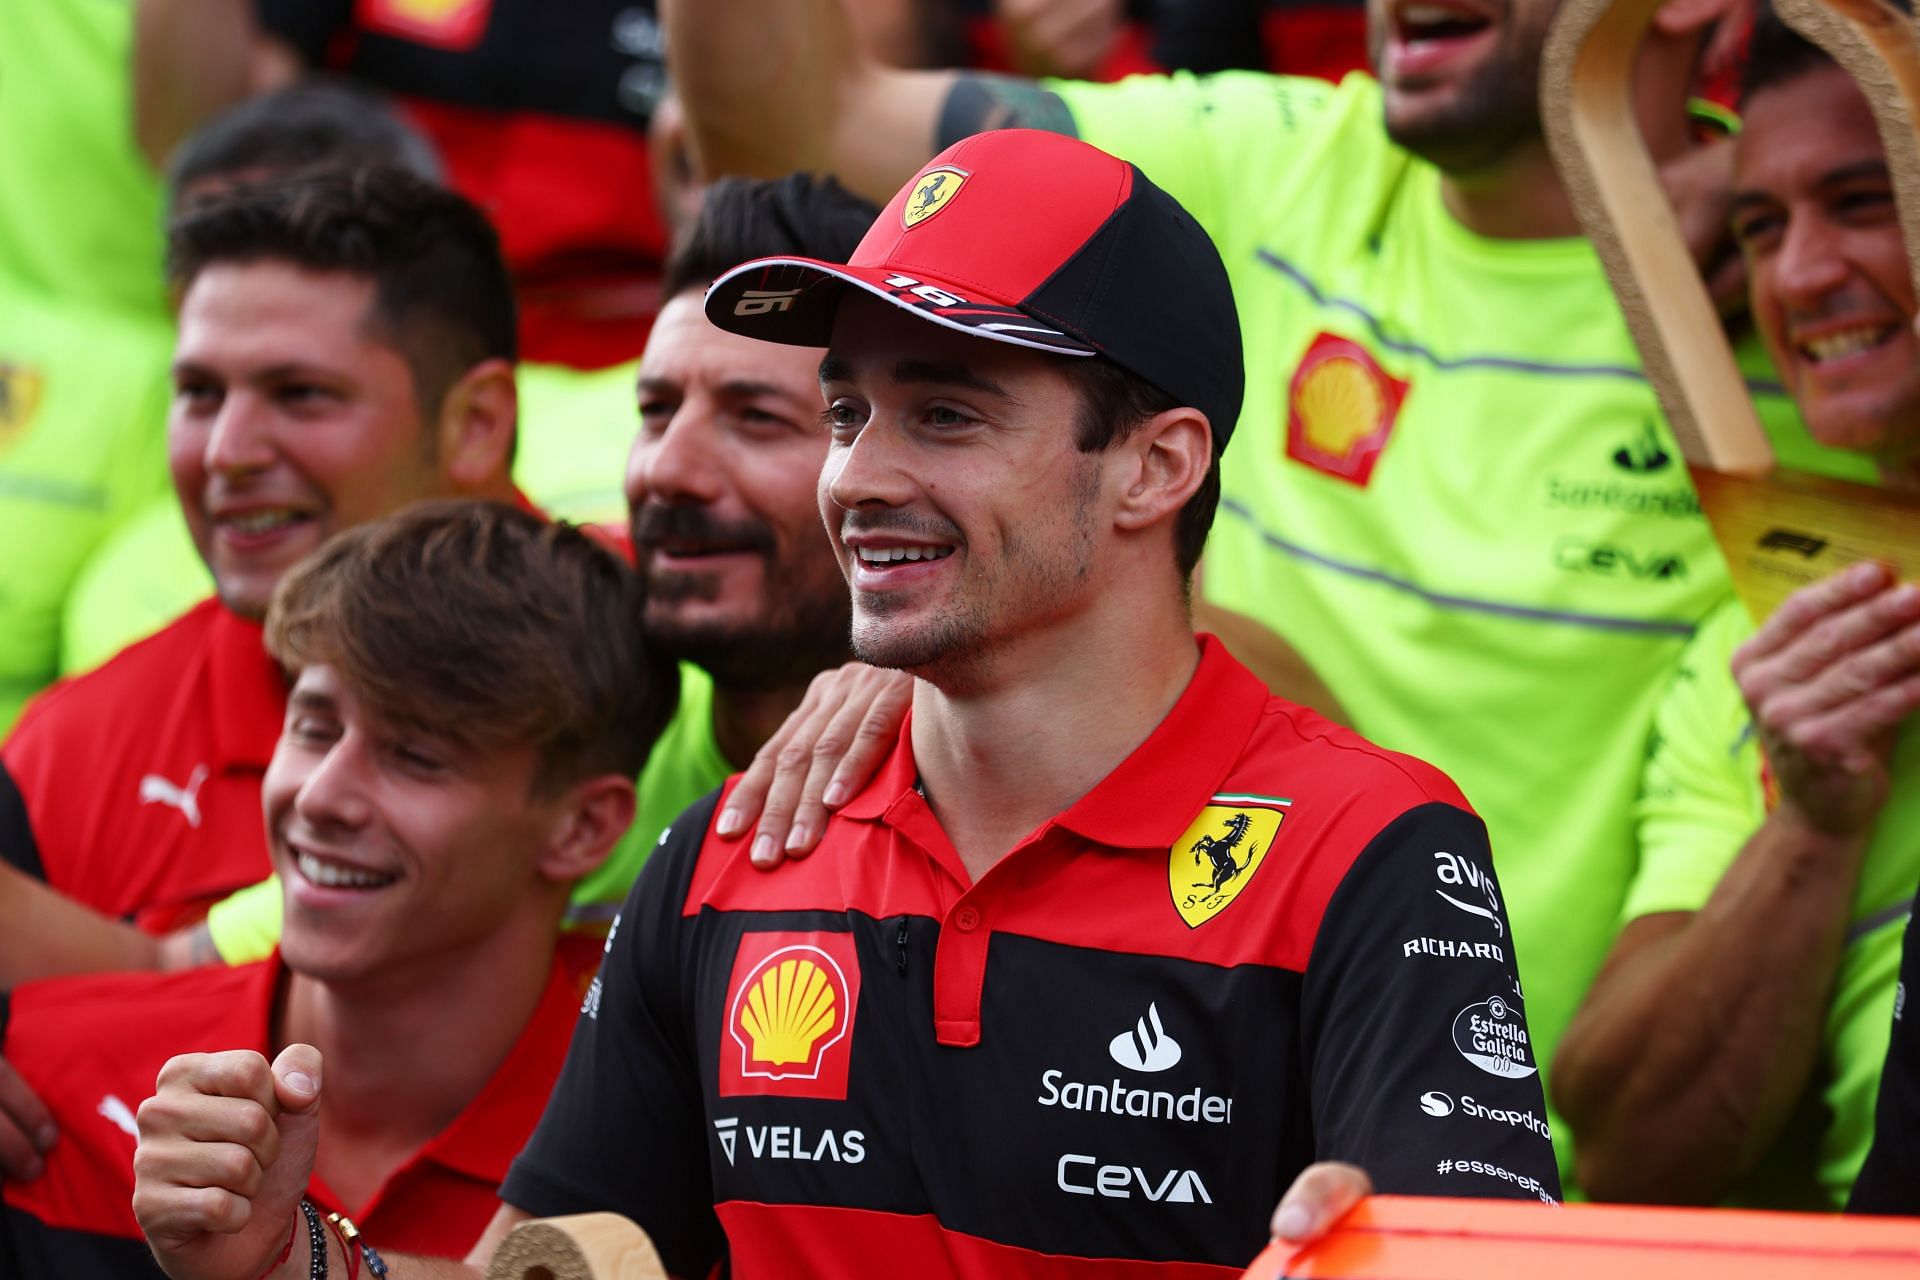 2022 F1 Grand Prix of Austria - Charles Leclerc celebrates with his team at Spielberg